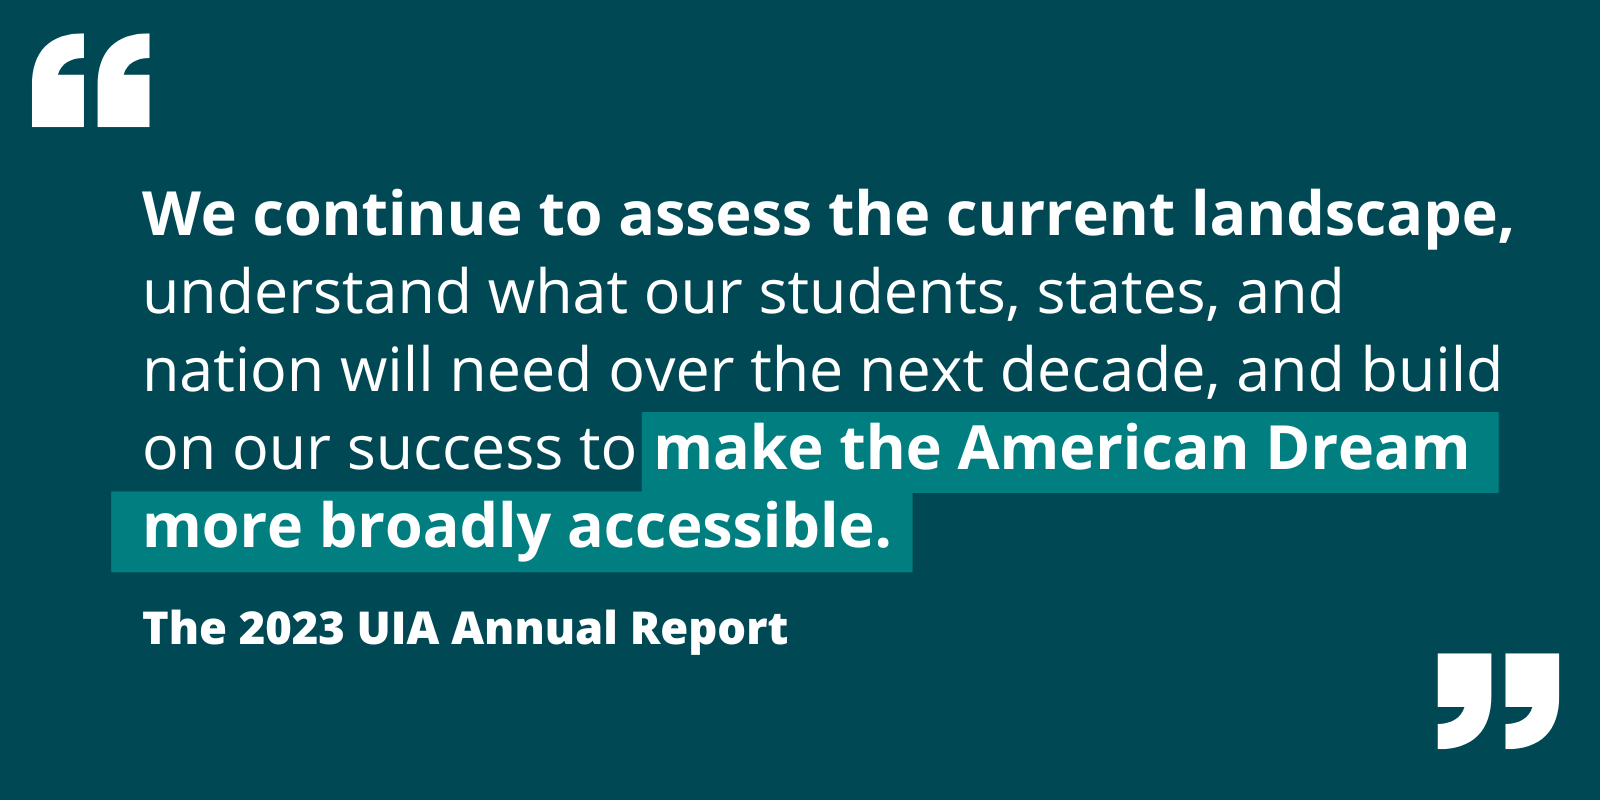 Hihglighted quote: we continue to assess the current landscape, understand what our students, states, and nation will need over the next decade, and build on our success to make the American Dream more broadly accessible.